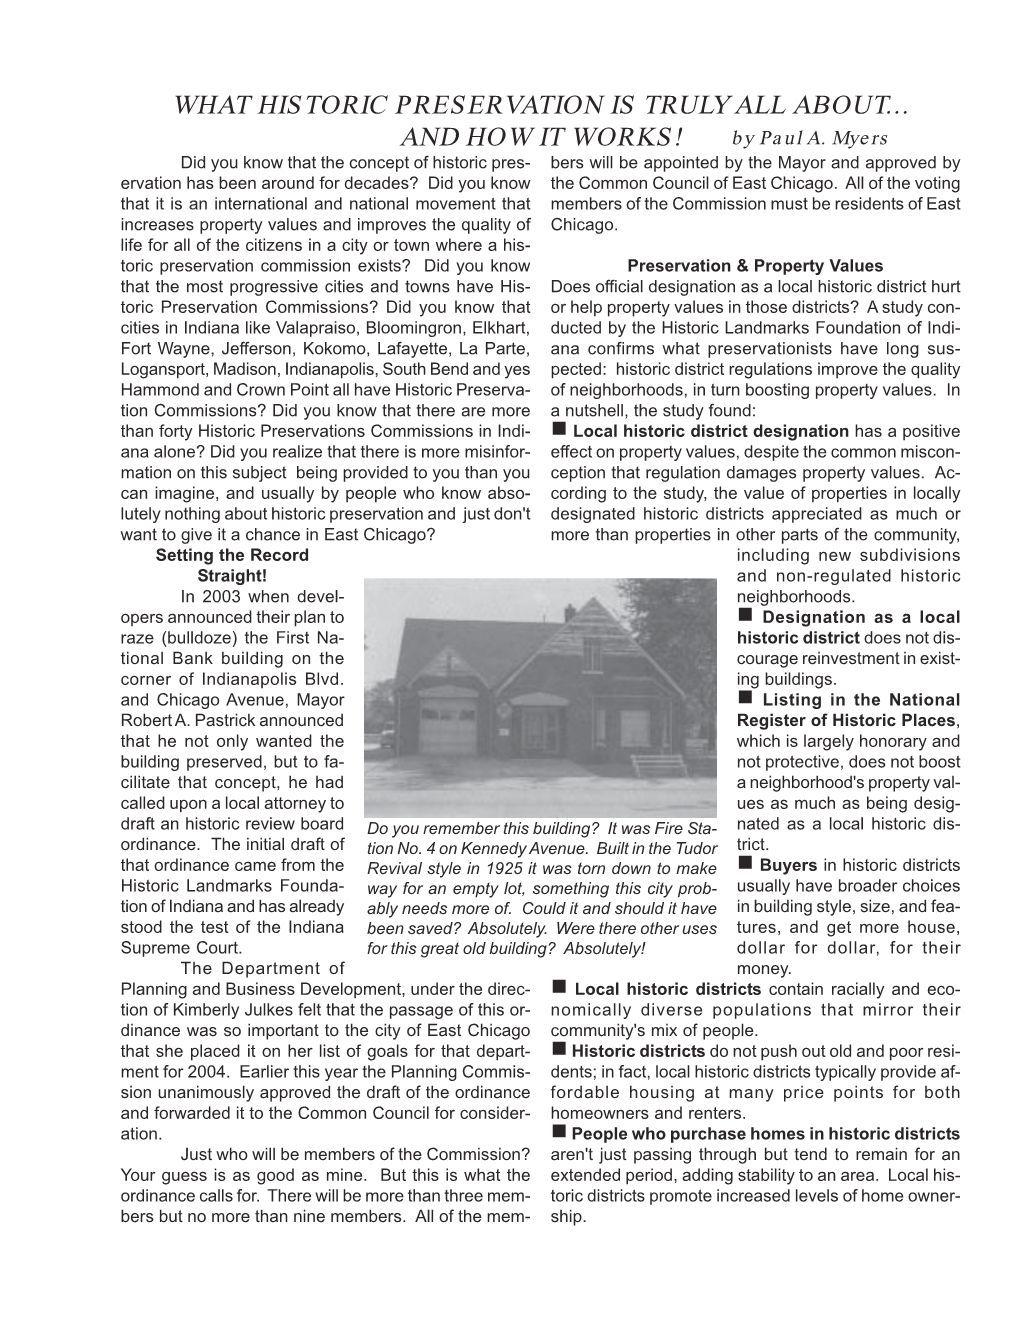 Historic Preservation Articles 01